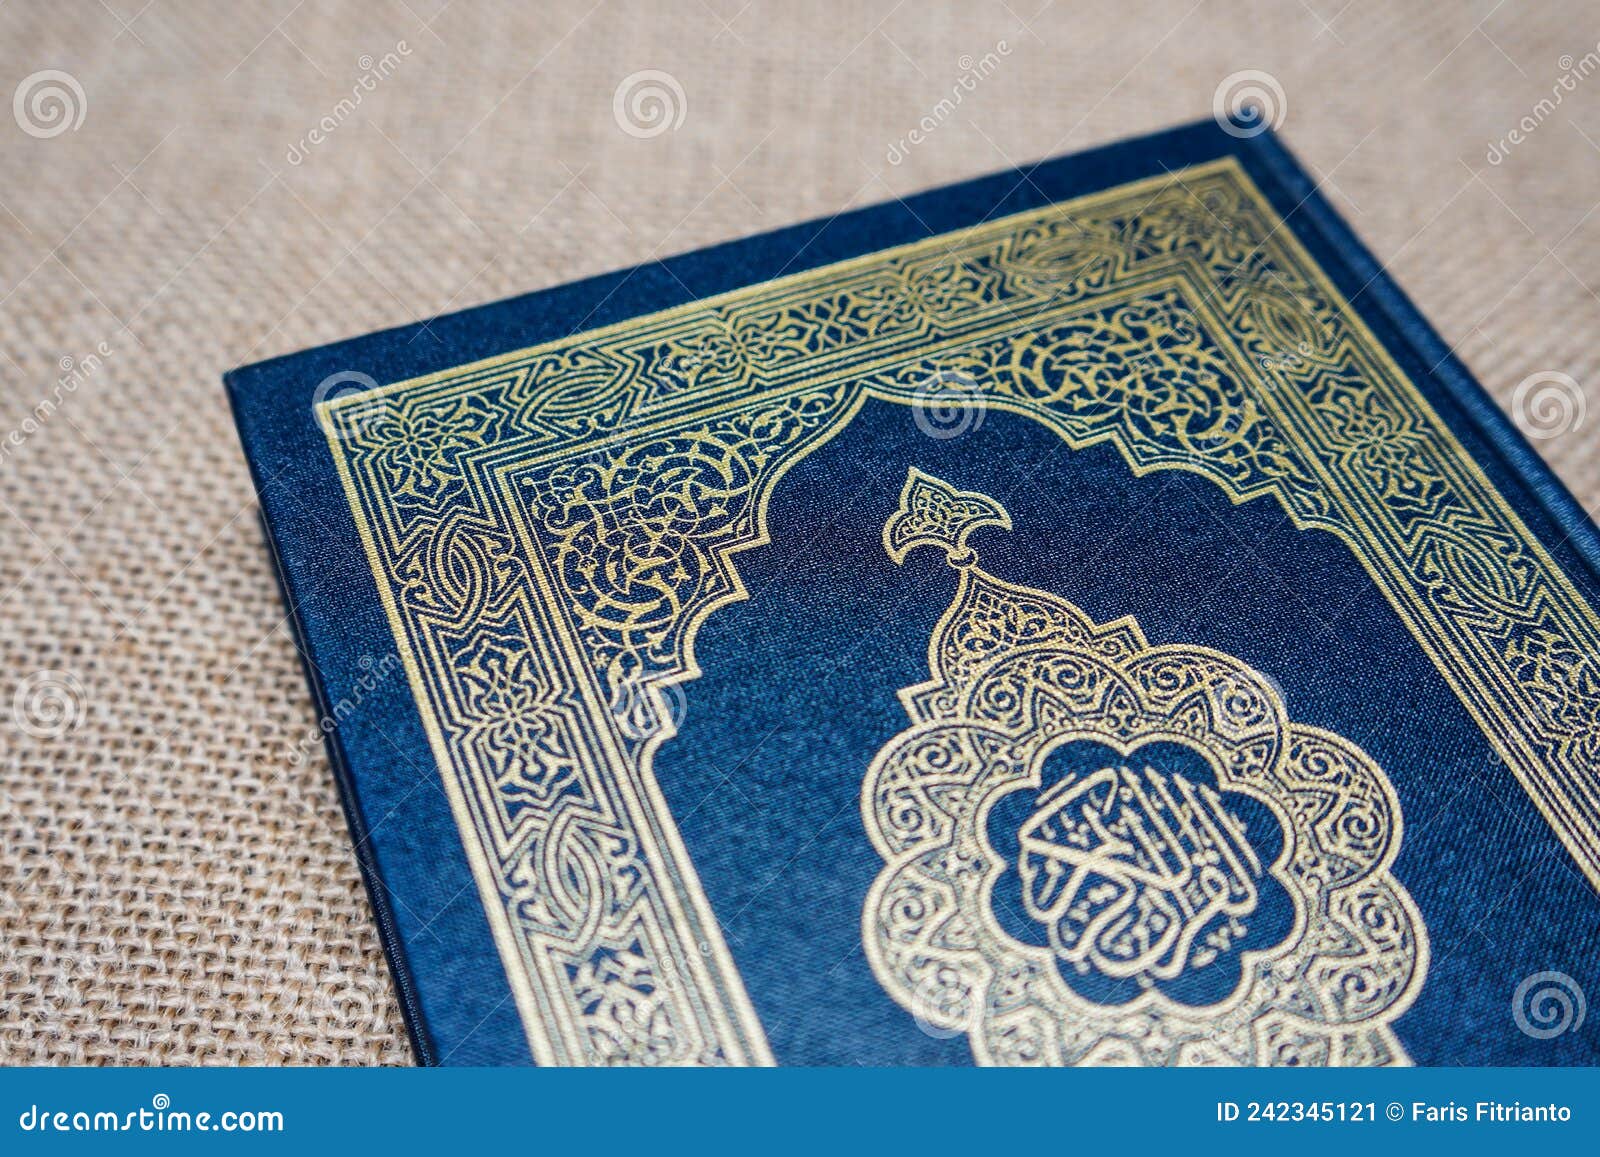 the quran, also romanized qur'an or koran, is the central religious text of islam.